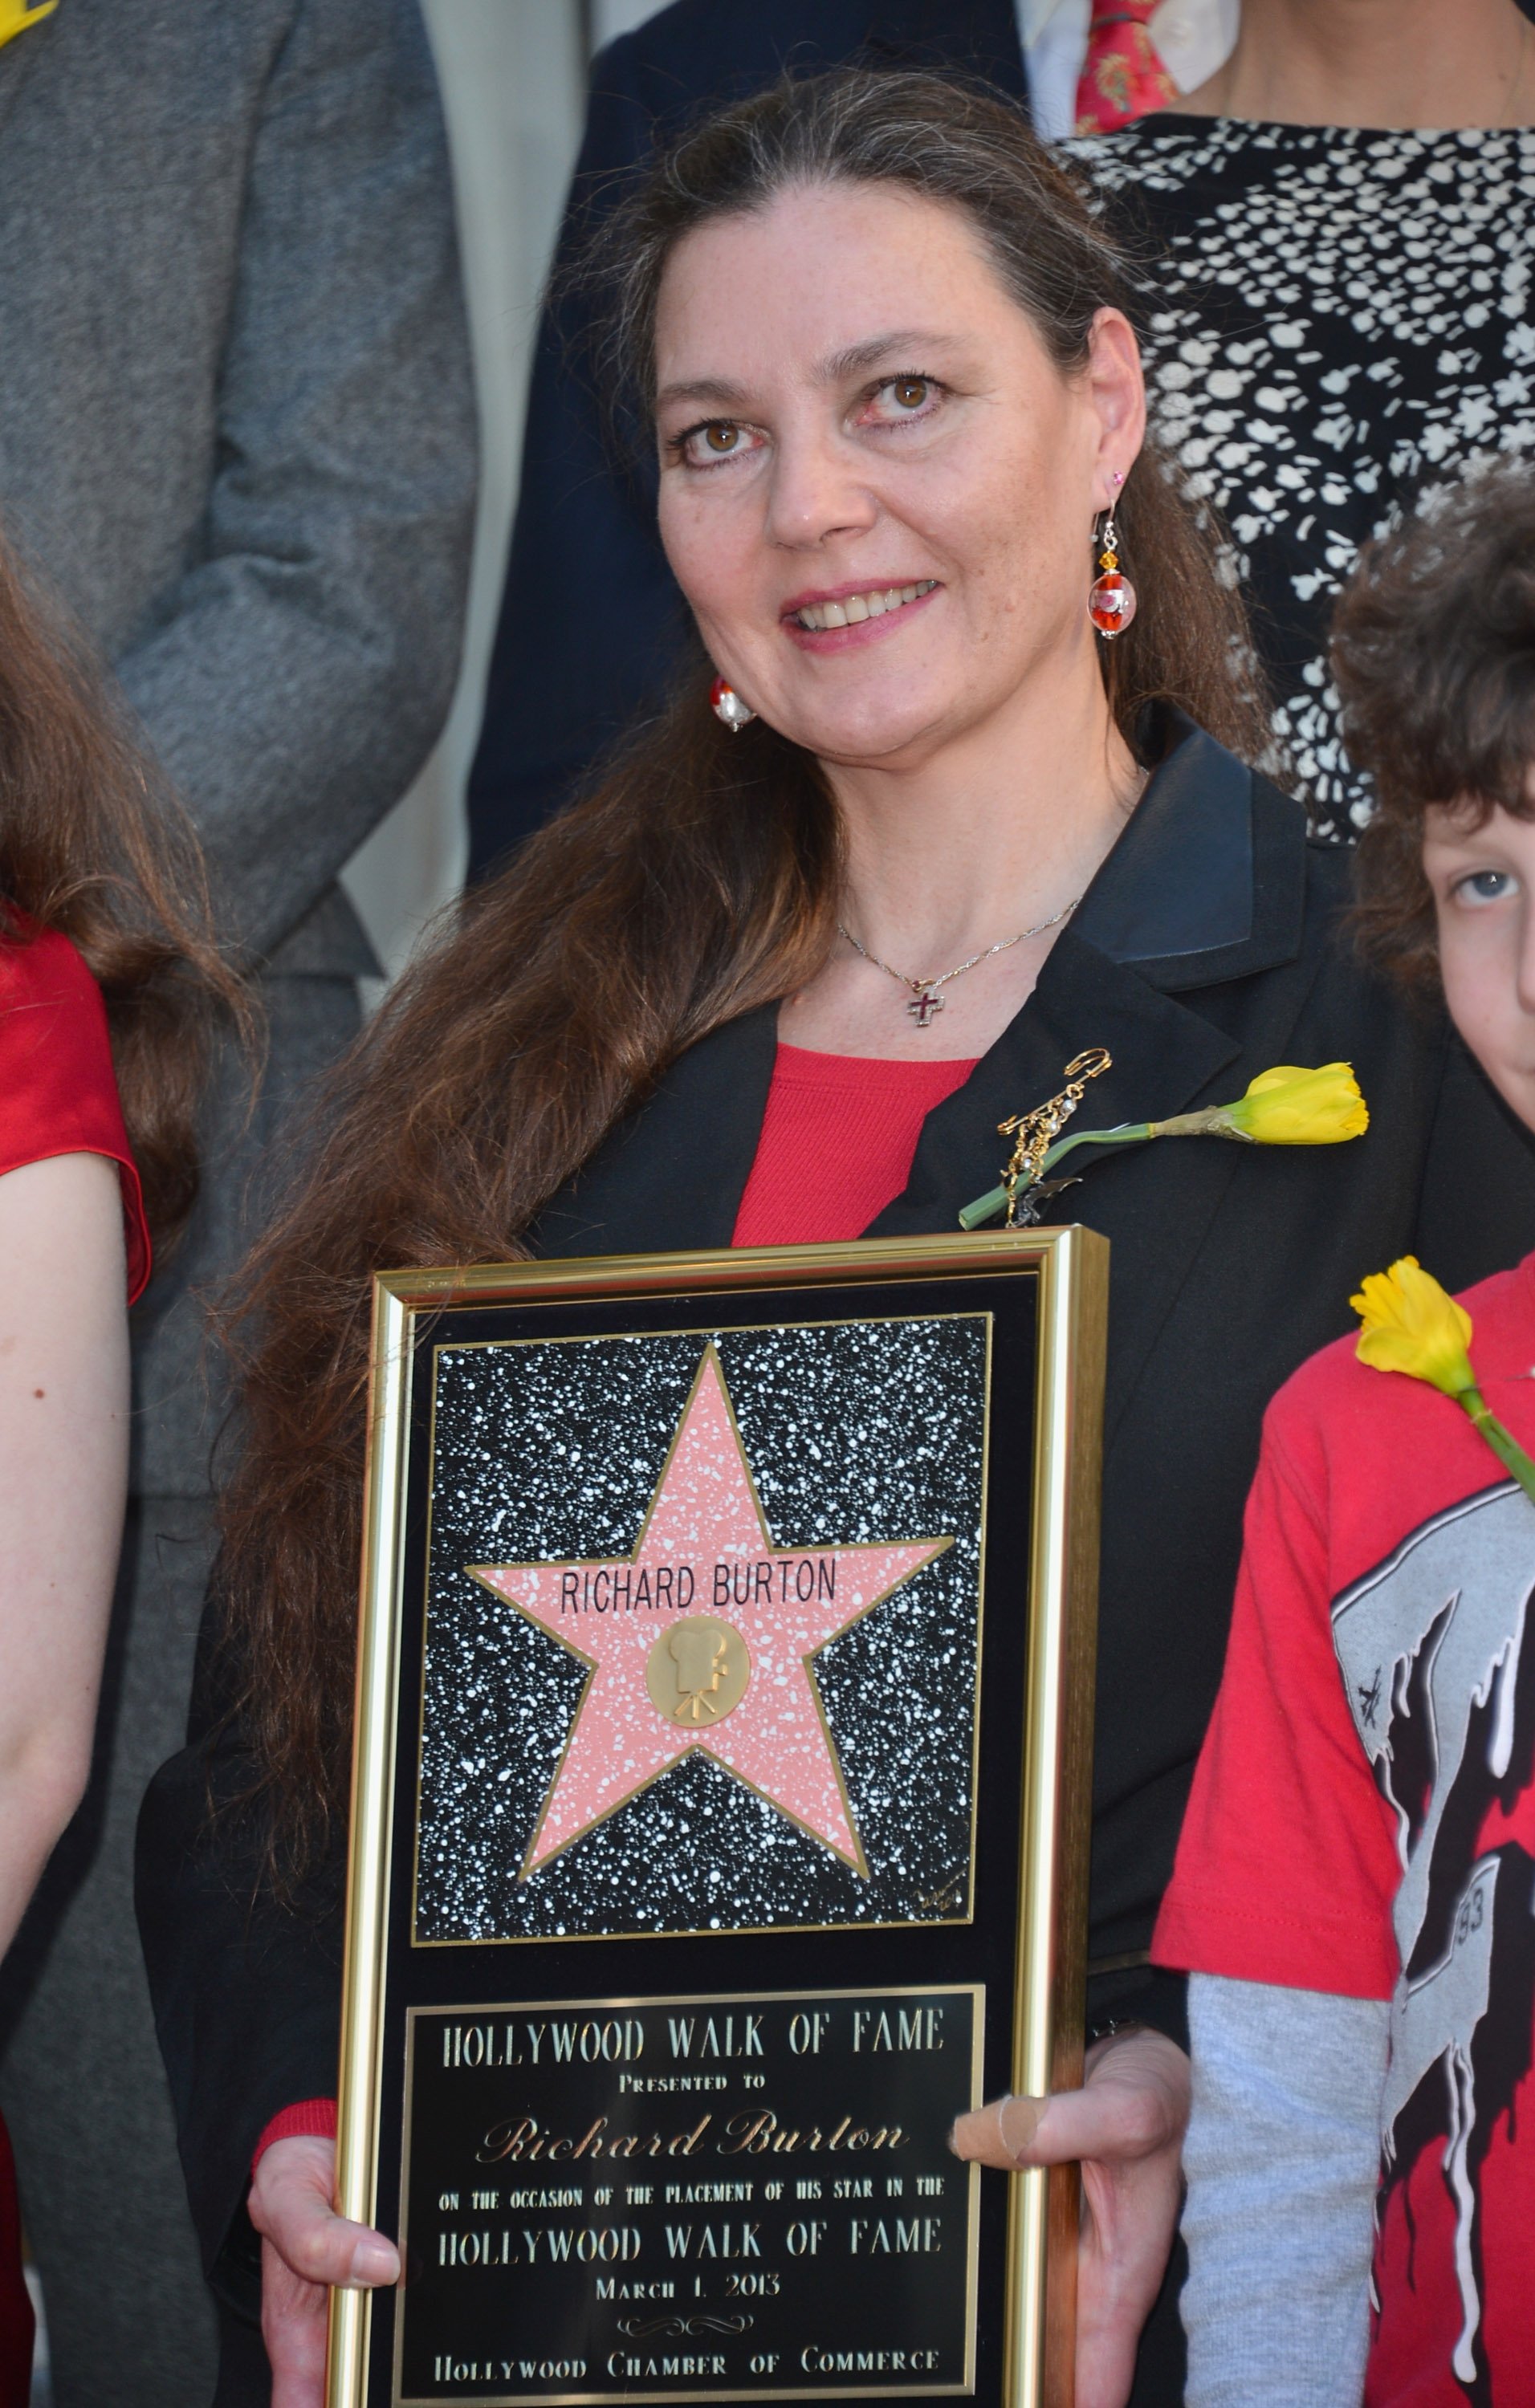 Maria Burton attends a ceremony honoring her father Richard Burton with a star on the Hollywood Walk of Fame on March 1, 2013, in Hollywood, California. | Source: Getty Images